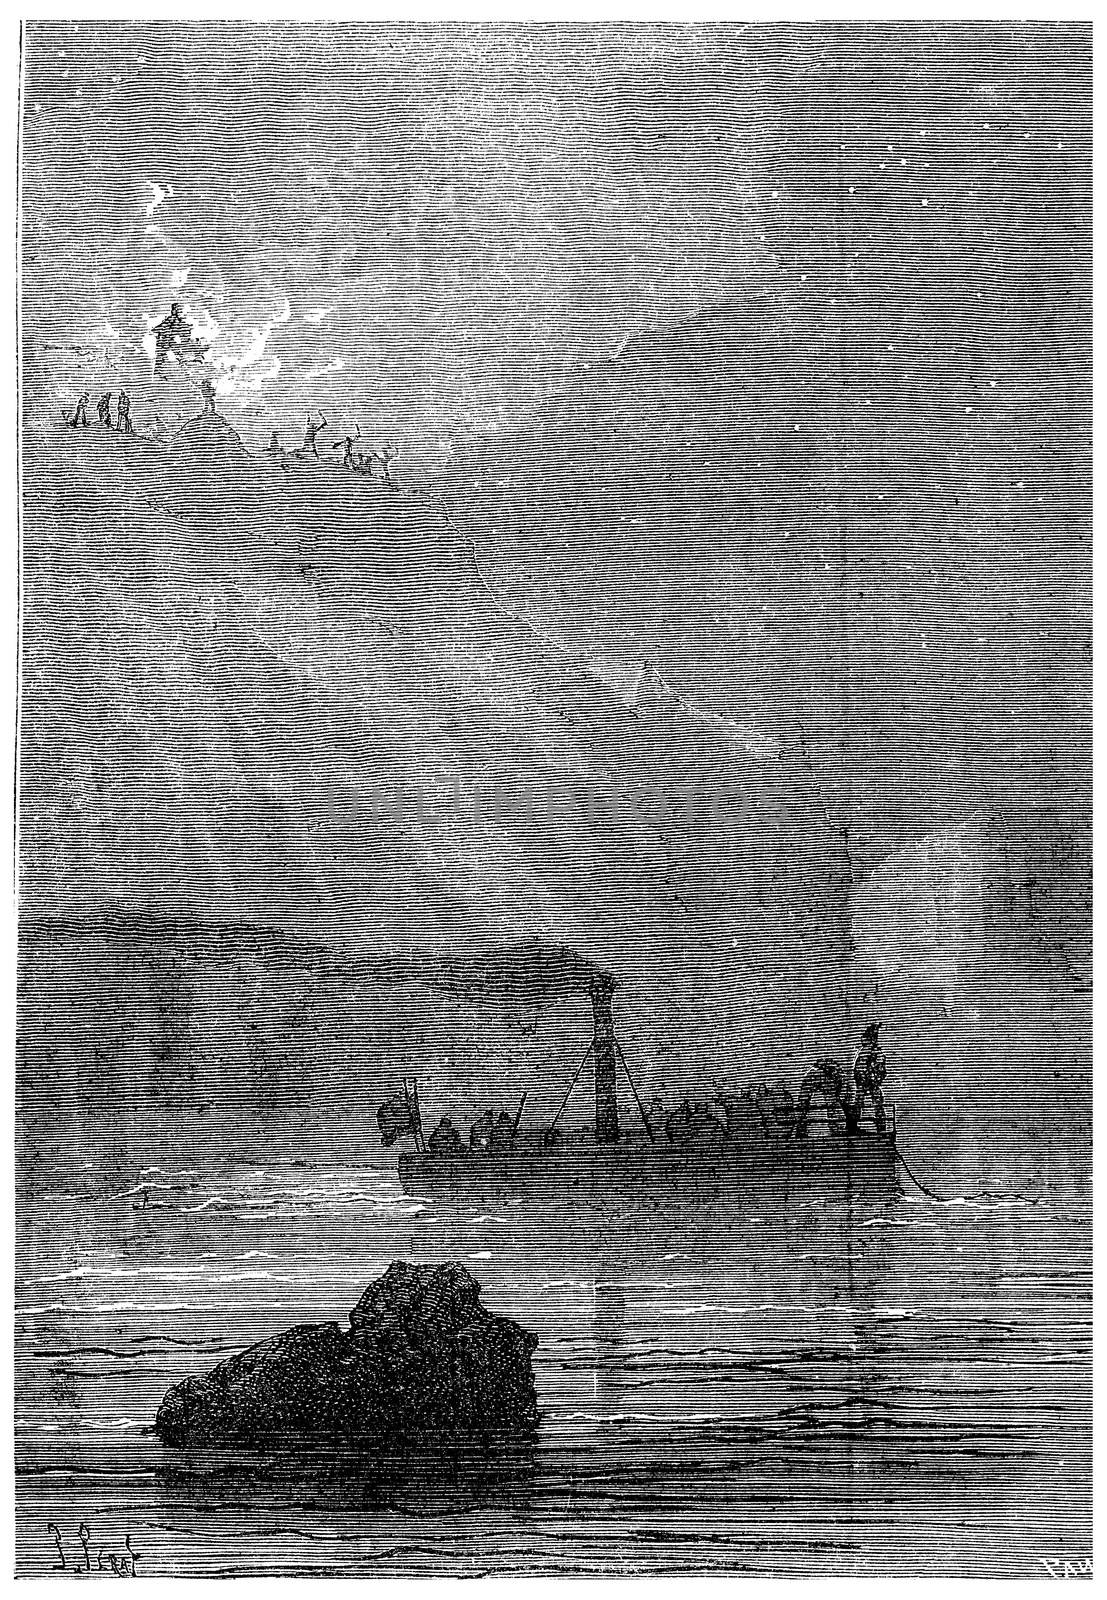 Soon the boat, vintage engraved illustration. Jules Verne 3 Russian and 3 English, 1872.	